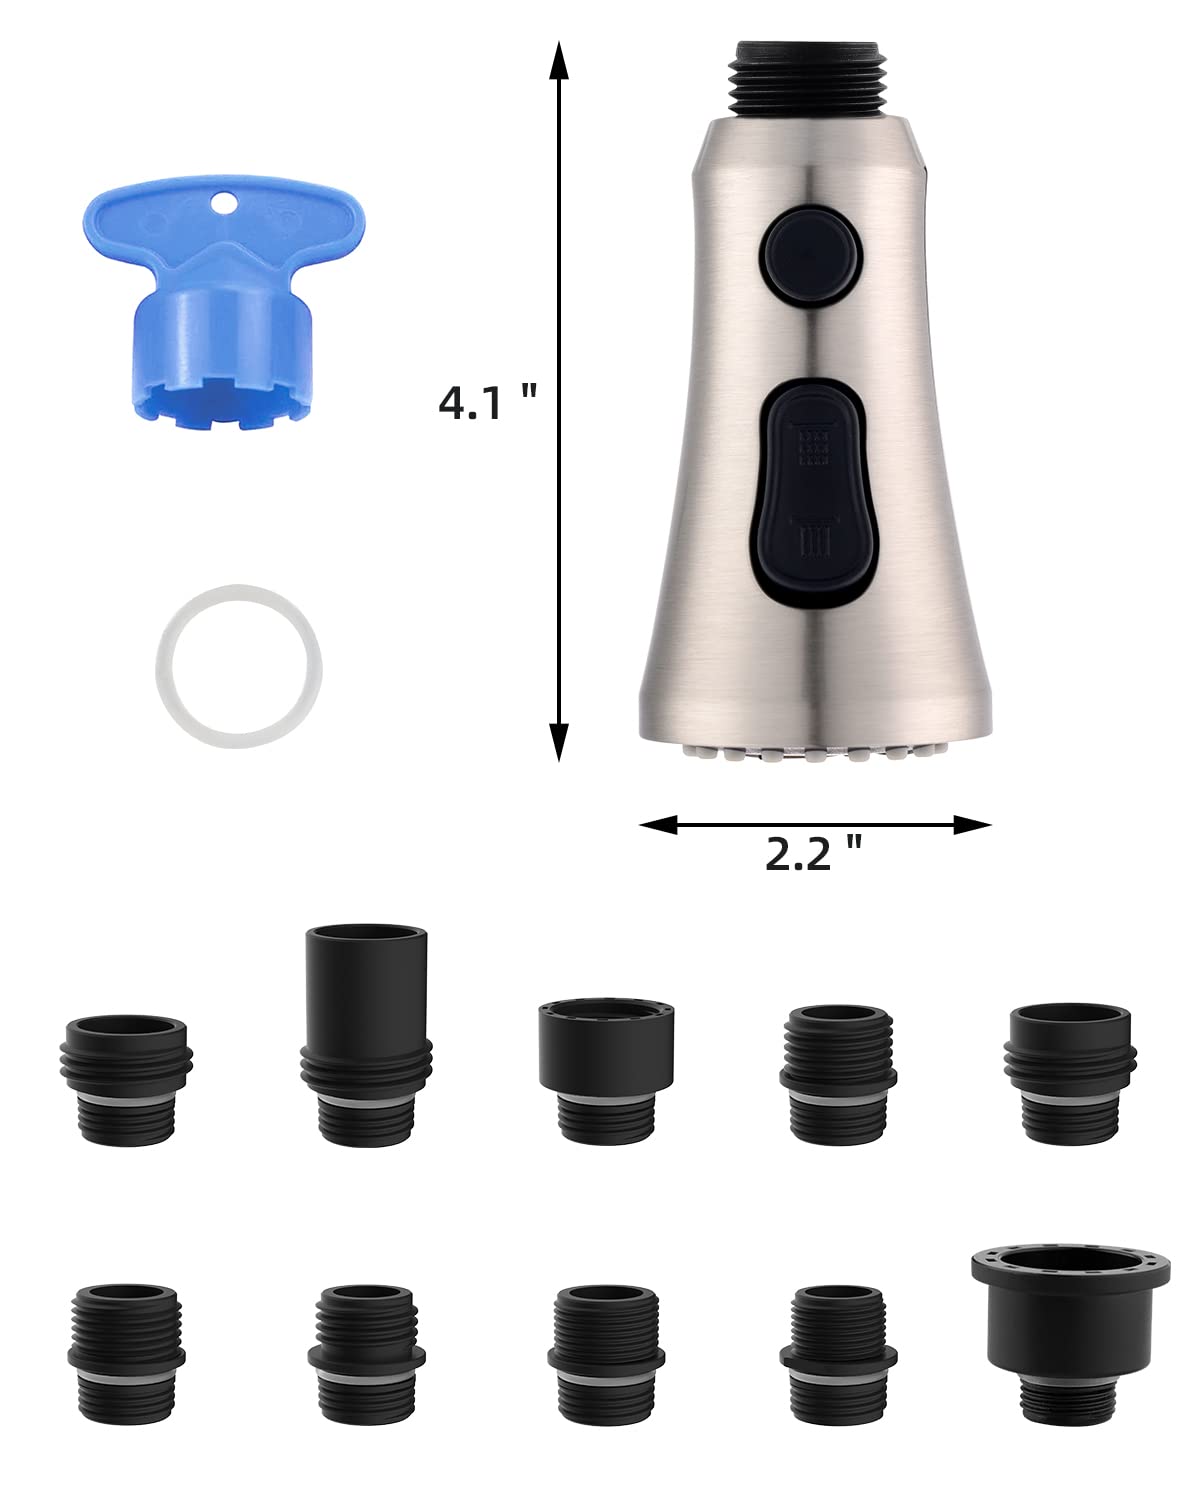 Hibbent Pull Down Kitchen Faucet Head Replacement, 3-Function Kitchen Sink Spray Nozzle with 10 Adapters, Compatible with Moen, American Standard, Delta, Kohler Faucets, Brushed Nickel